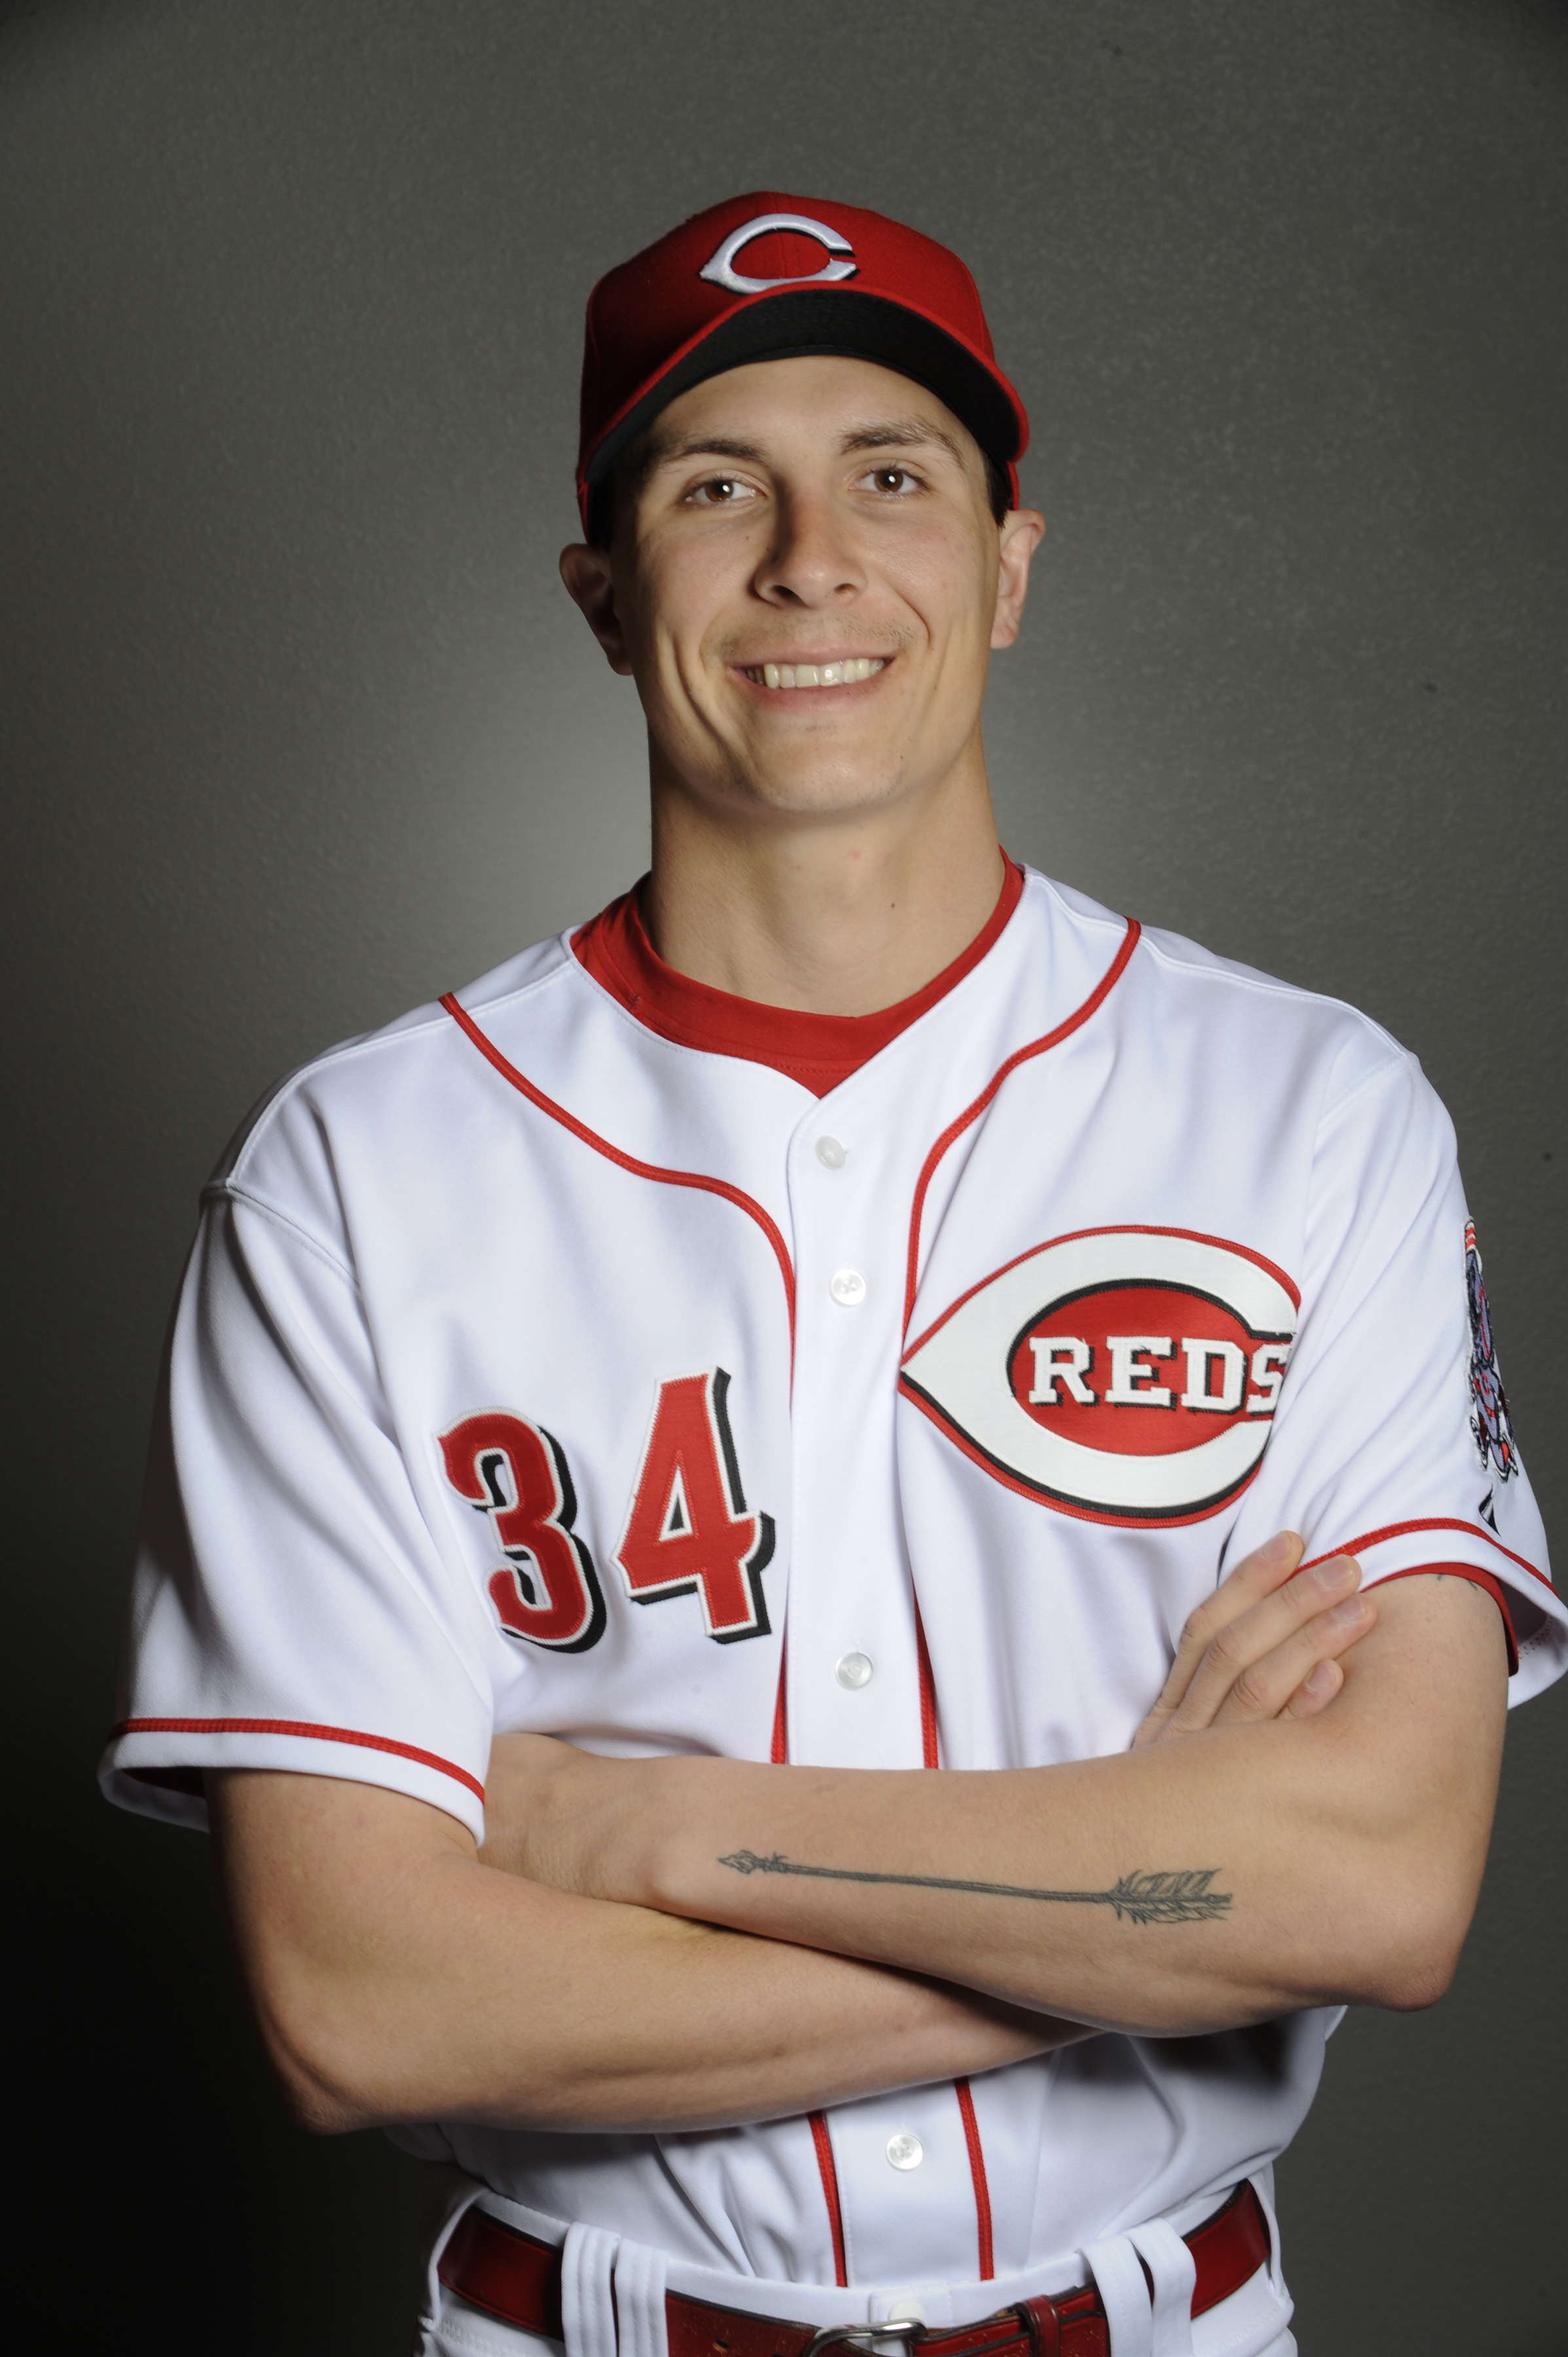 GOODYEAR, AZ - FEBRUARY 20: Homer Bailey #34 of the Cincinnati Reds poses during the Cincinnati Reds photo day at the Cincinnati Reds Spring Training Complex on February 20, 2011 in Goodyear, Arizona. (Photo by Rob Tringali/Getty Images)